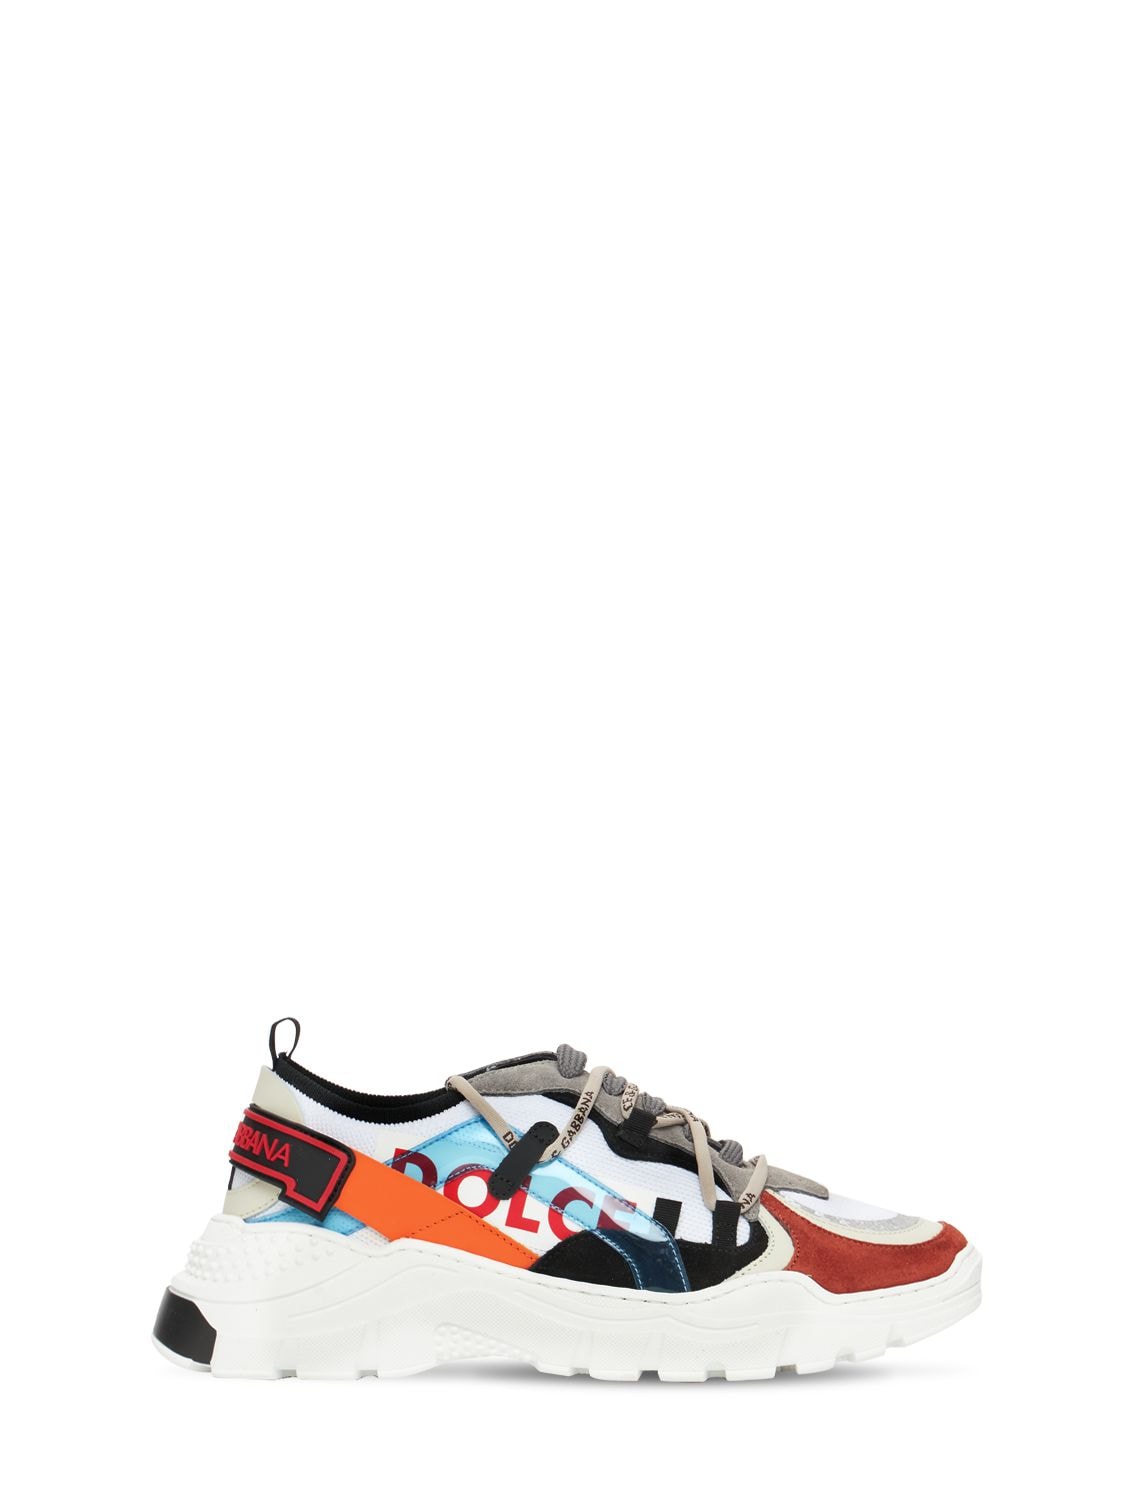 Dolce & Gabbana Kids' Printed Lace-up Sneakers In Multicolor